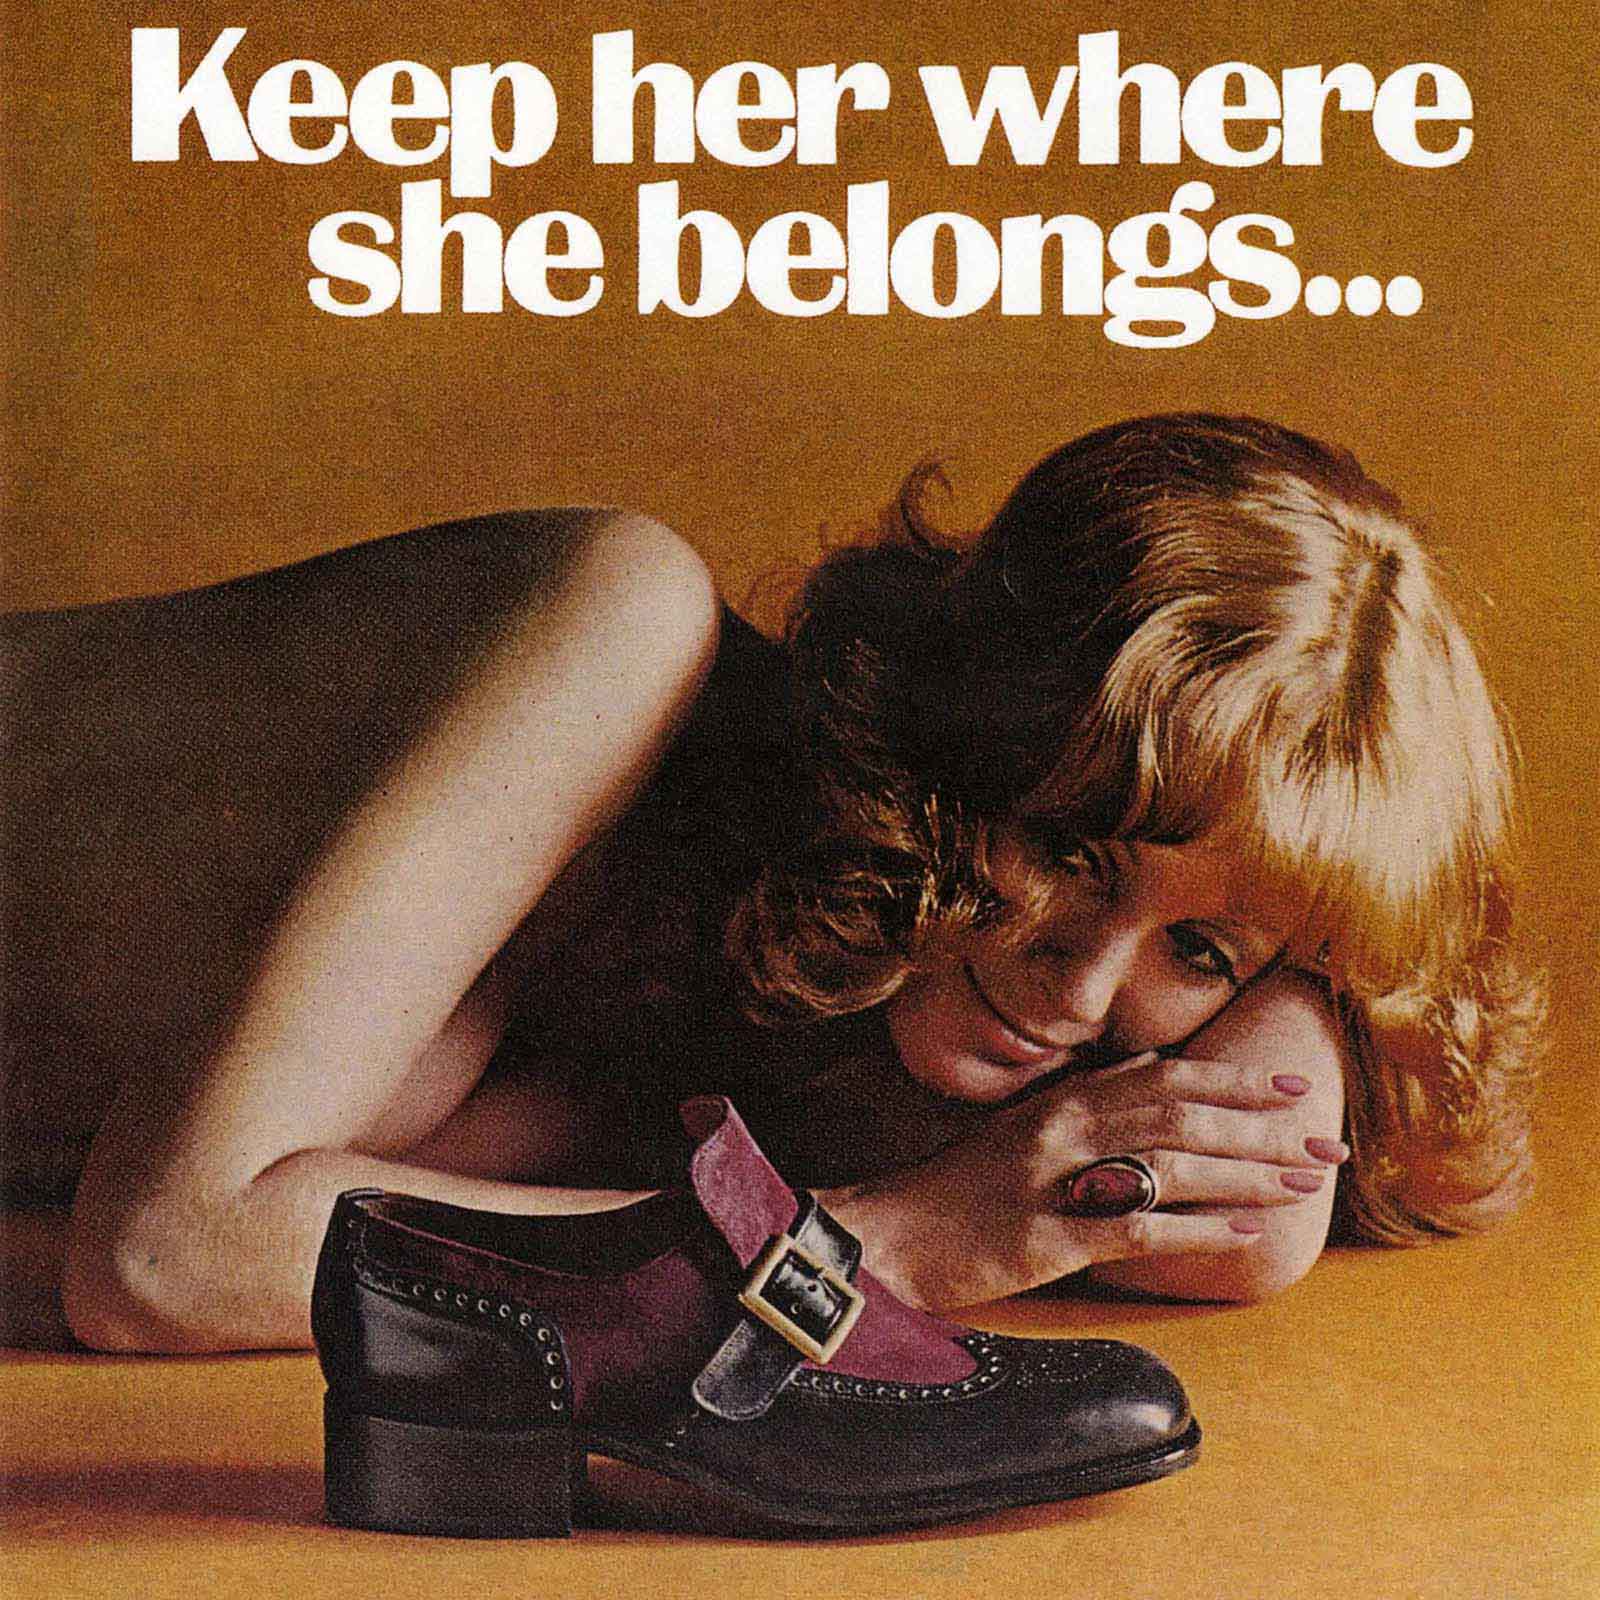 A sexist vintage ad from the 1970s, promoting some fancy two-tone men’s shoes.